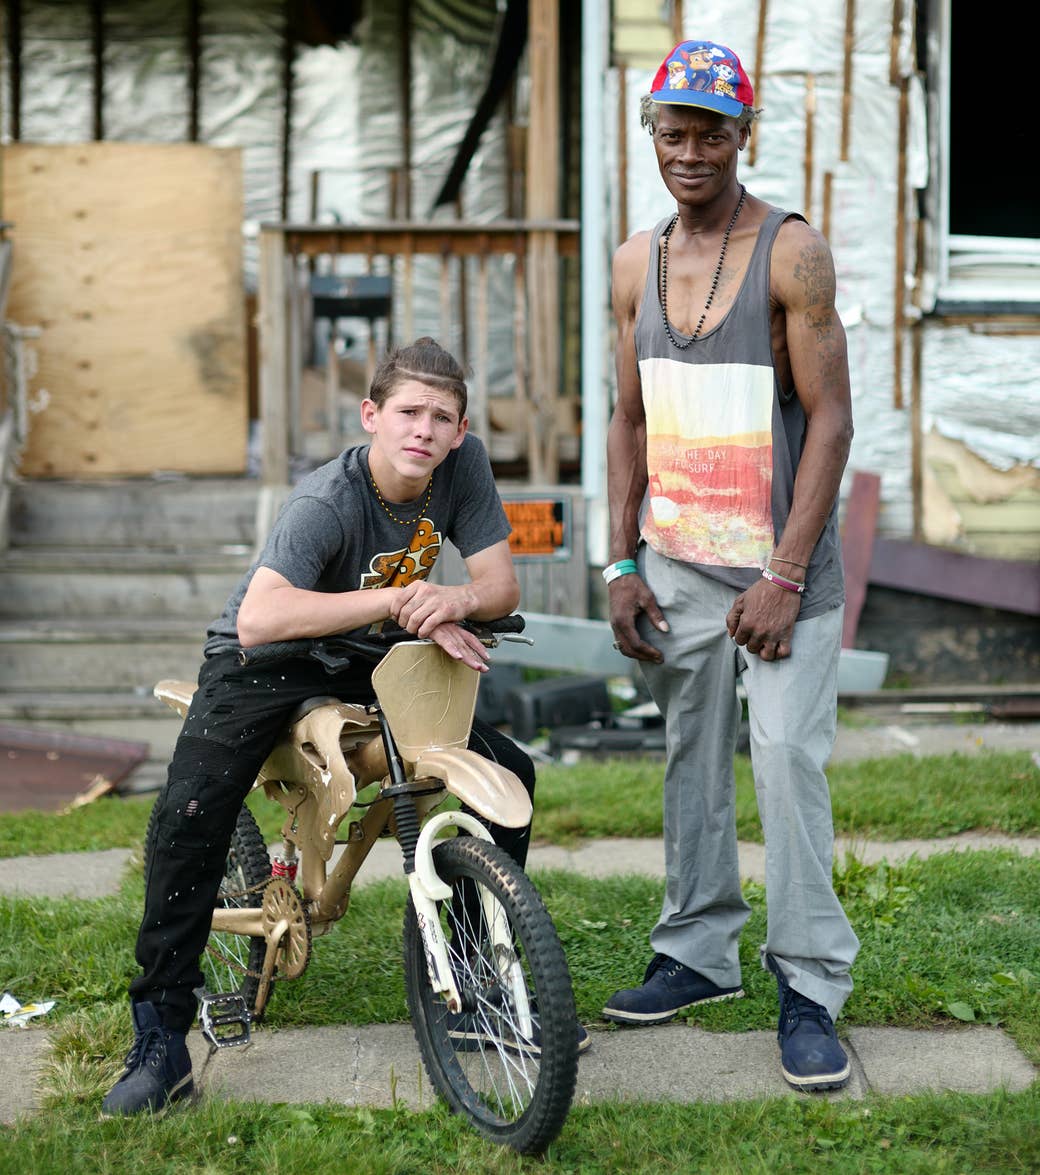 A boy on a bike and a man standing in front of a boarded-up house